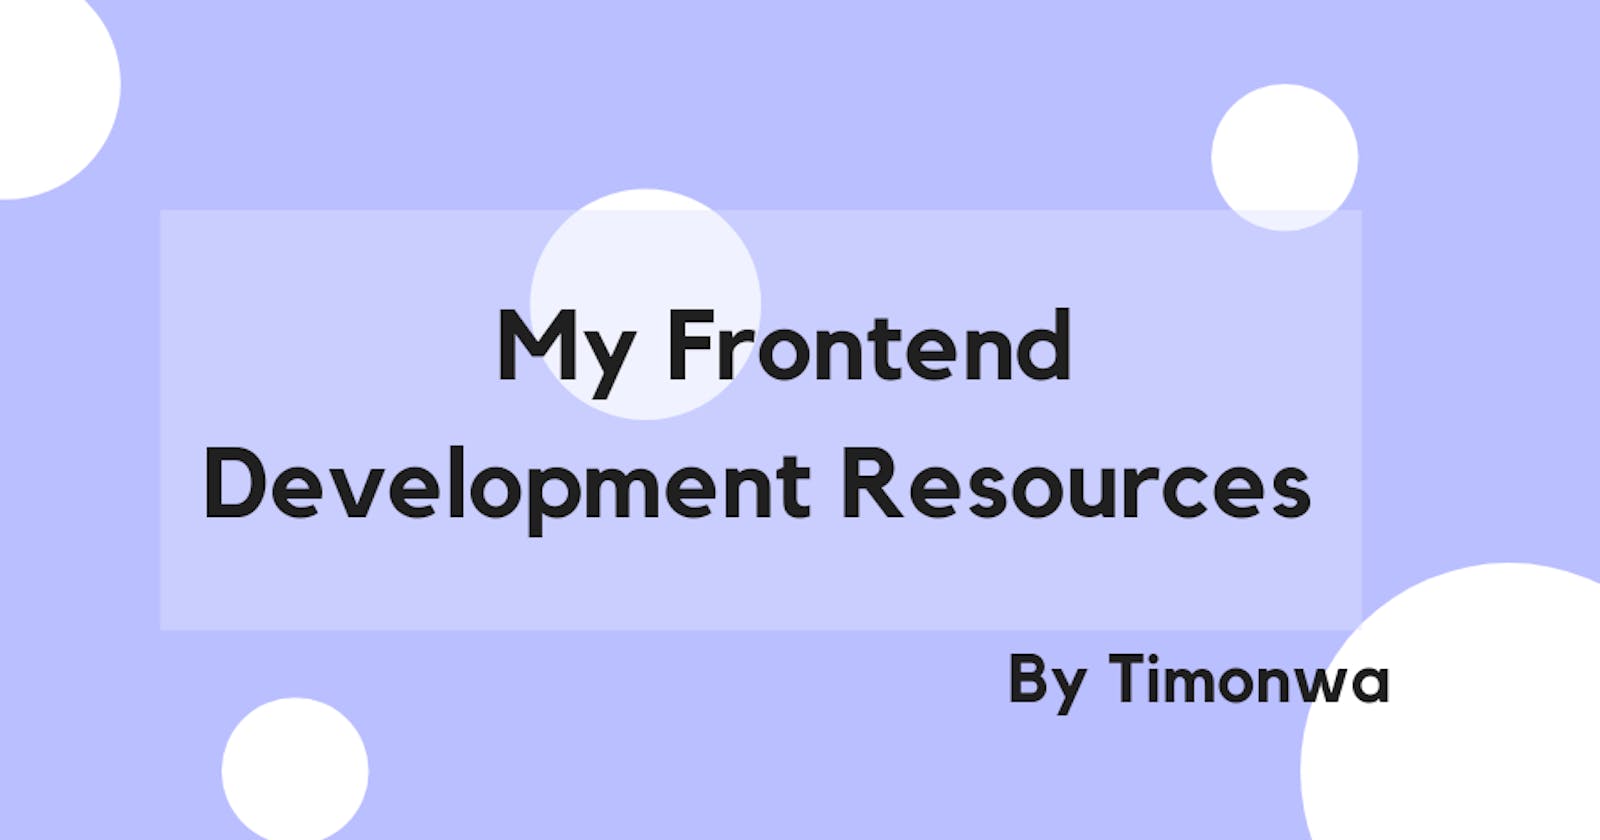 Resources that helped me on my Frontend Development Journey